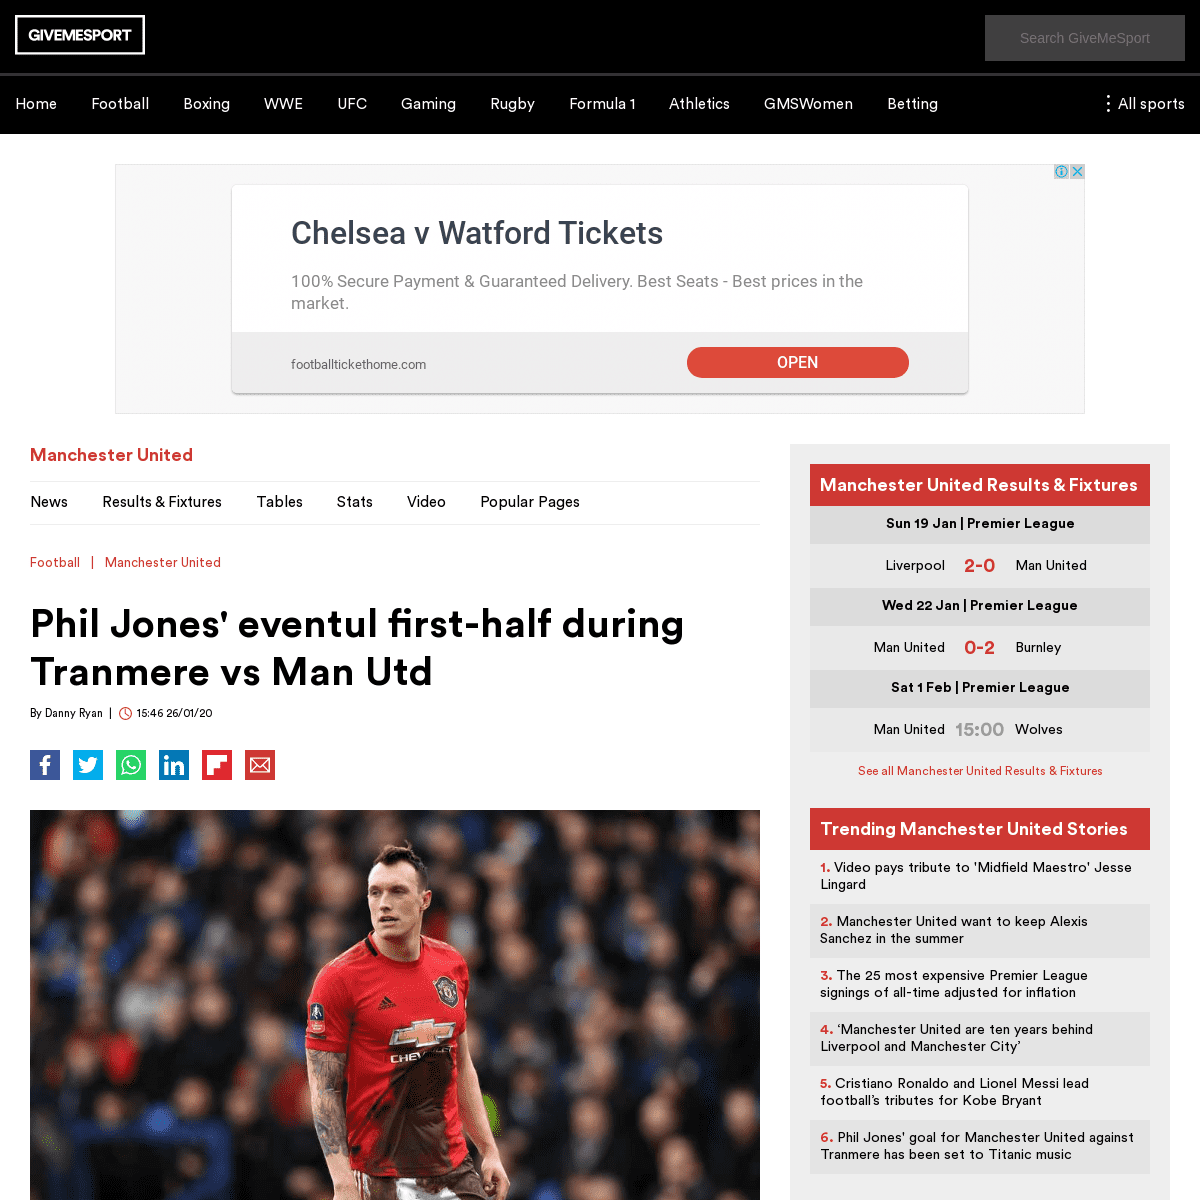 A complete backup of www.givemesport.com/1541449-phil-jones-eventul-firsthalf-during-tranmere-vs-man-utd